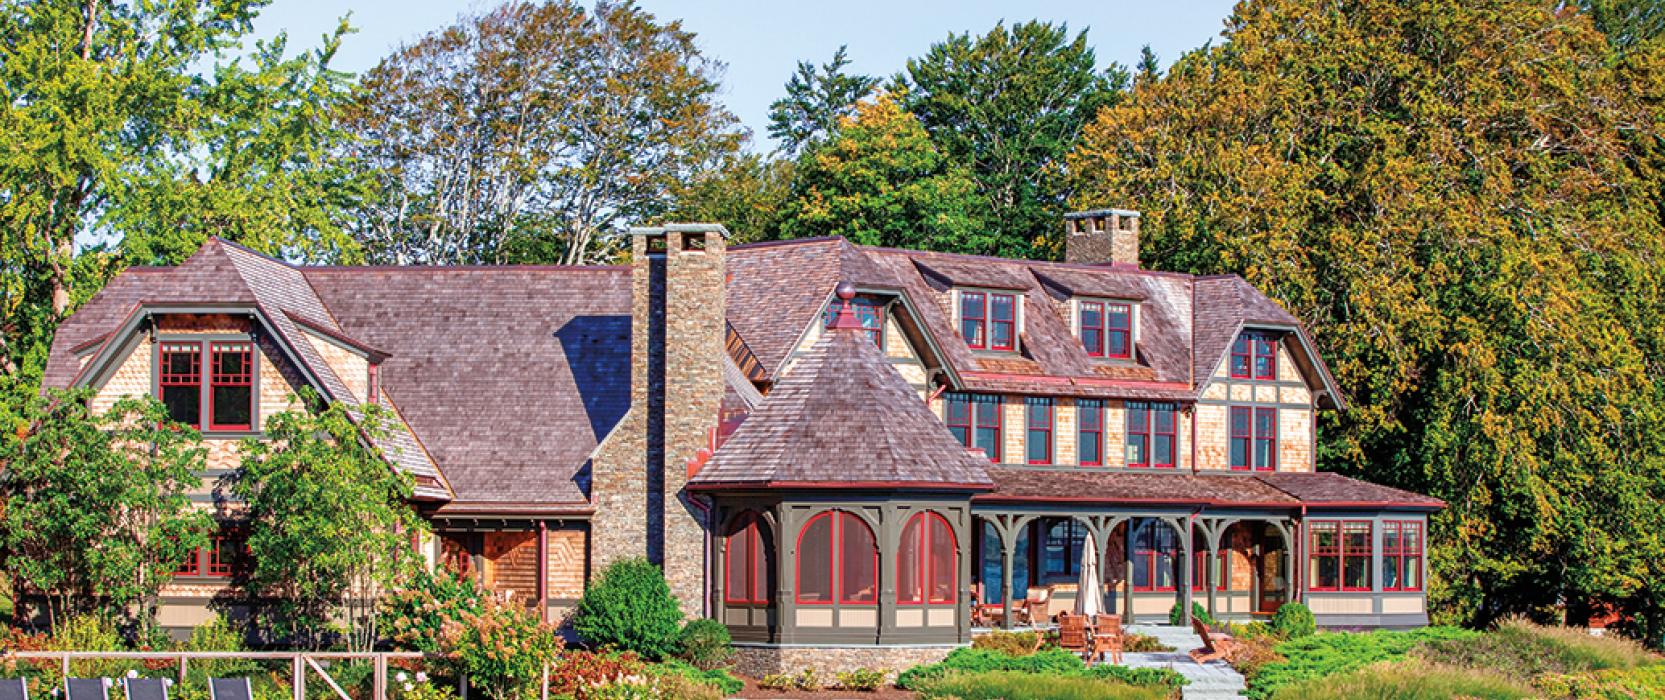 high-end residential architecture in Rhode Island